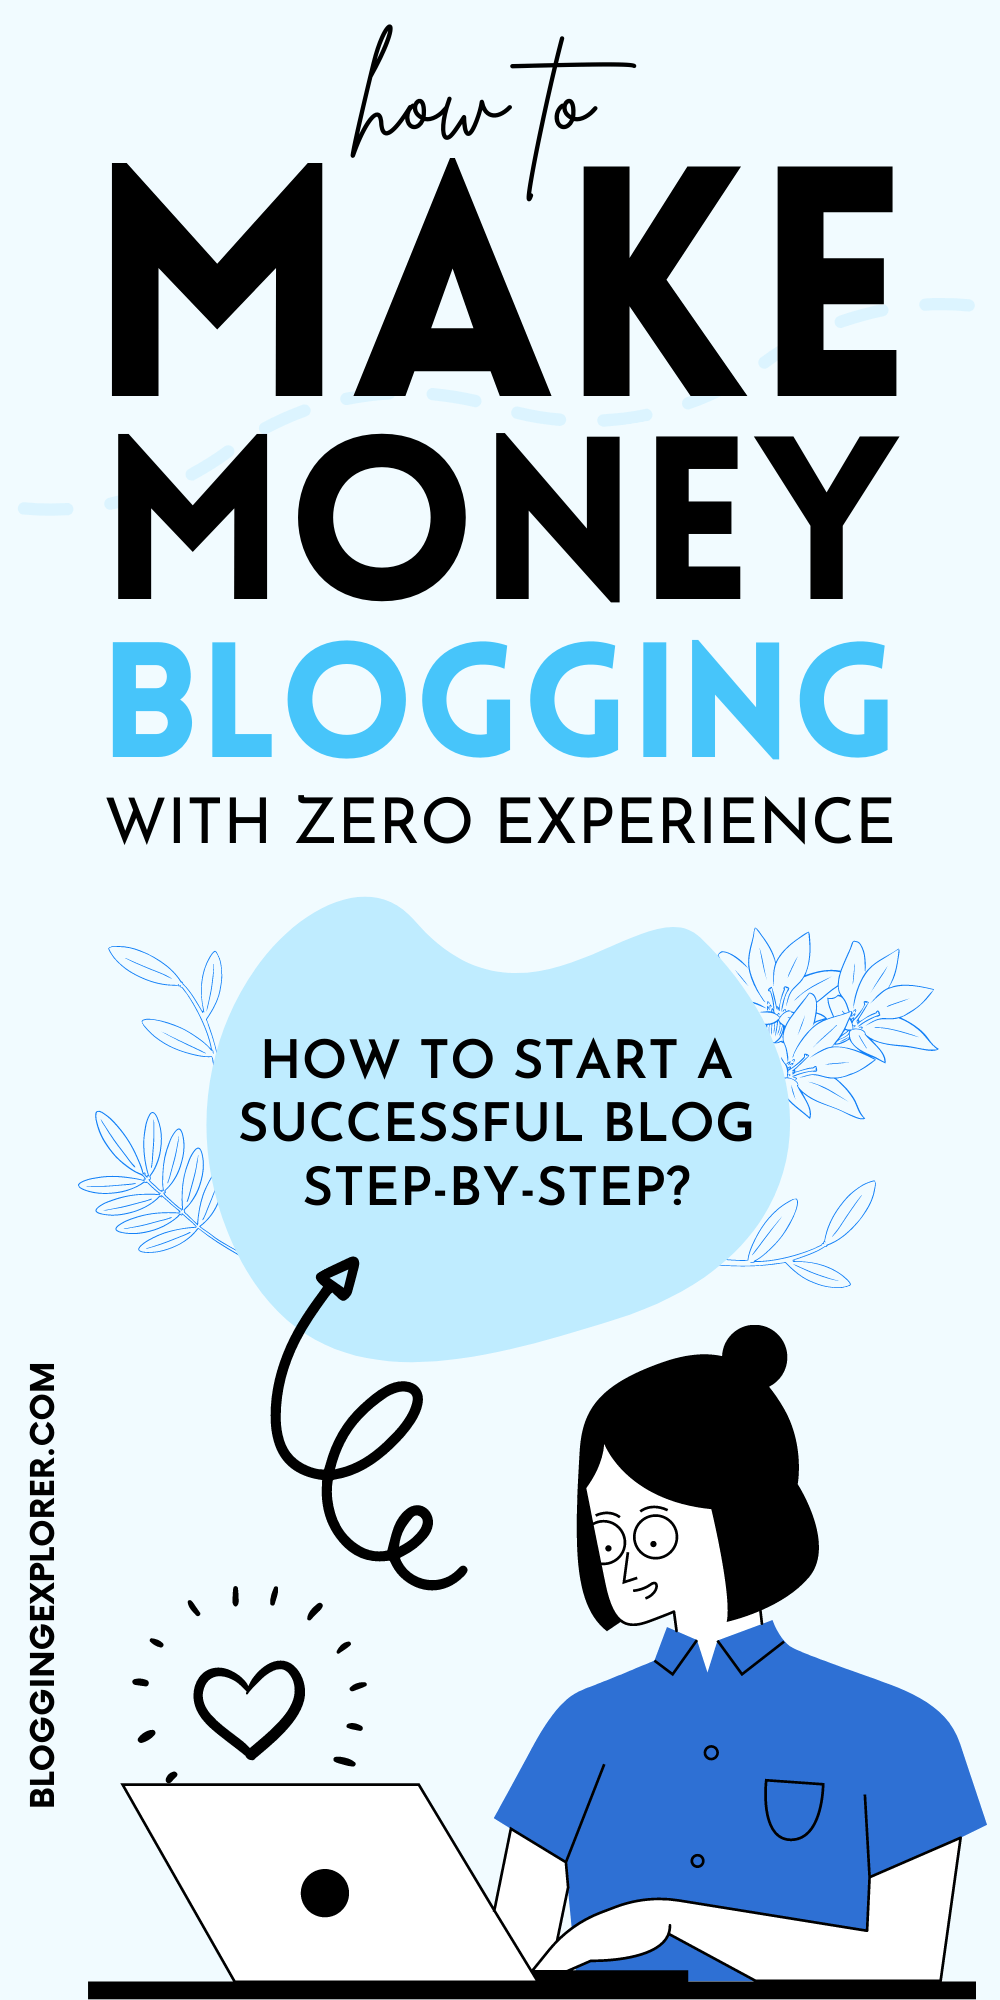 How to Make Money Blogging for Beginners (2021): Step-by-Step Guide